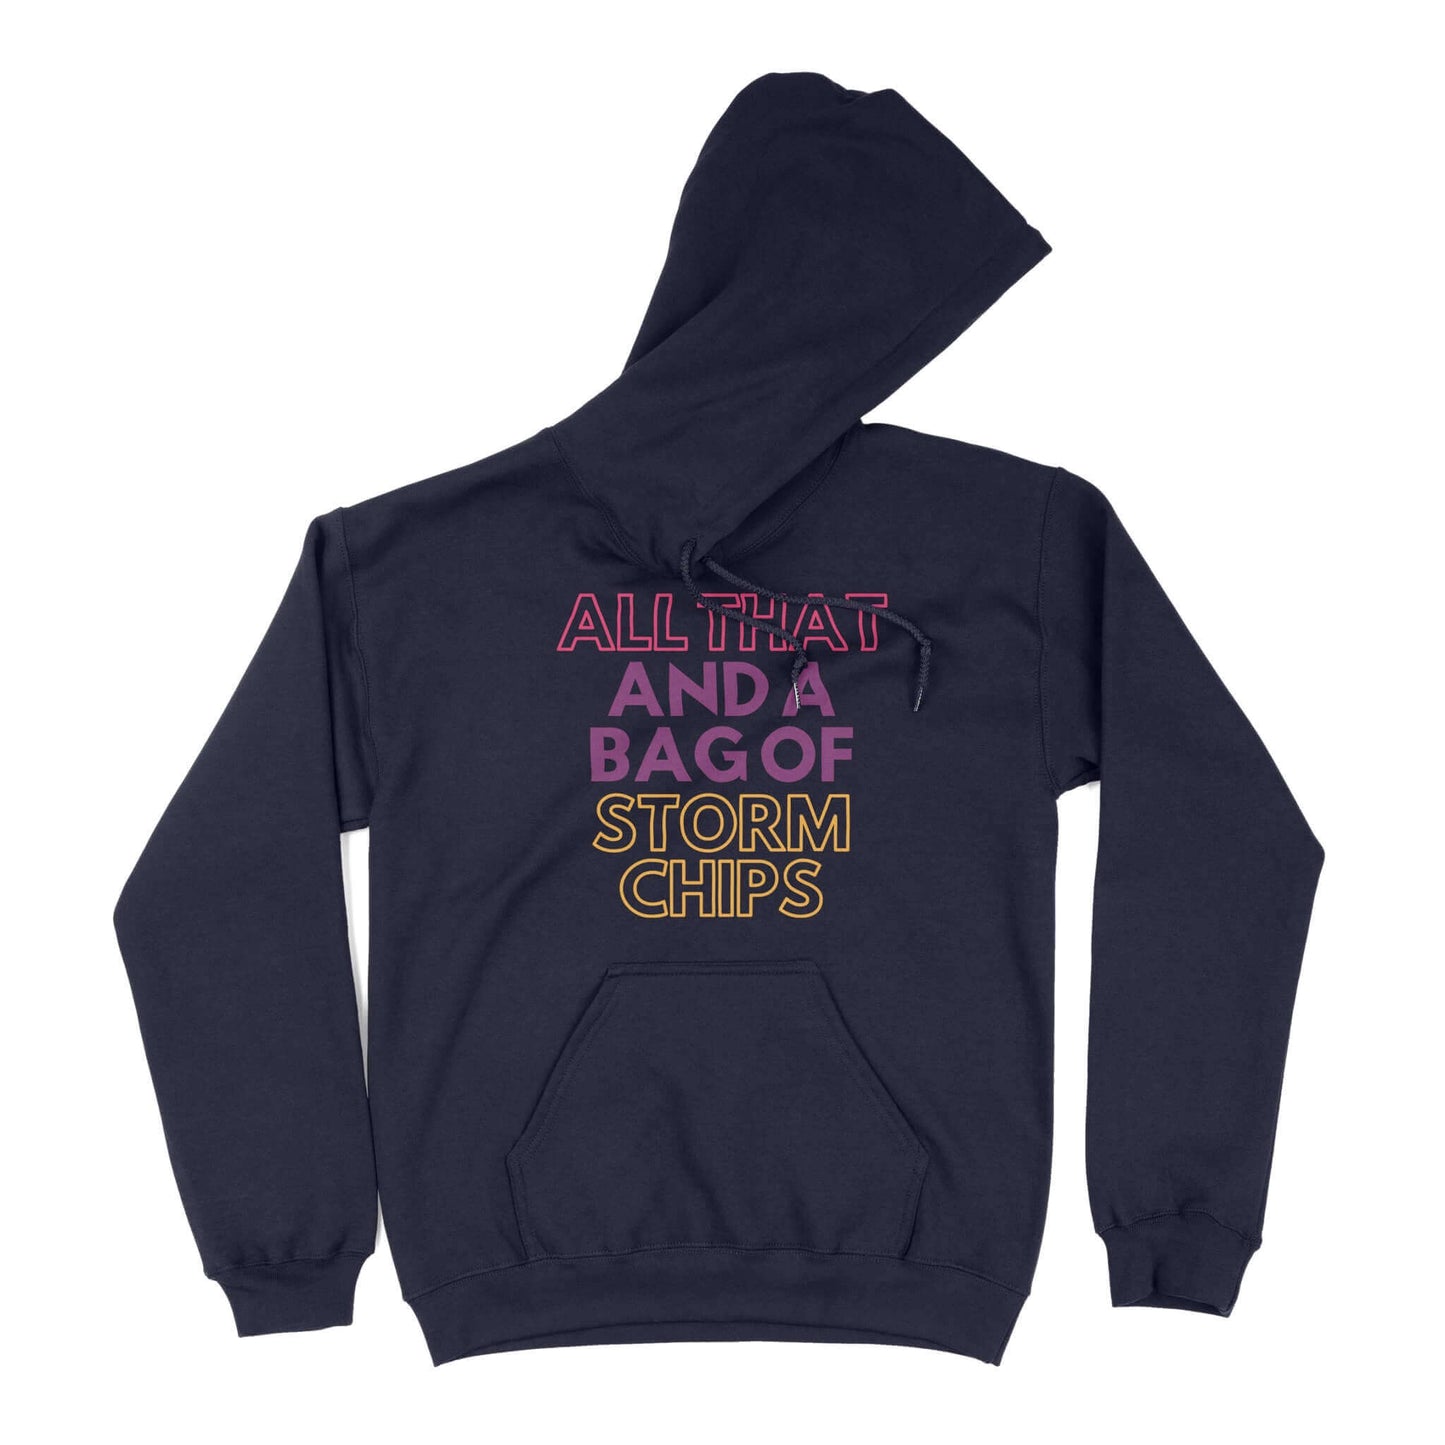 All That and a Bag of Storm Chips Unisex Hoodie in Color: Navy - East Coast AF Apparel